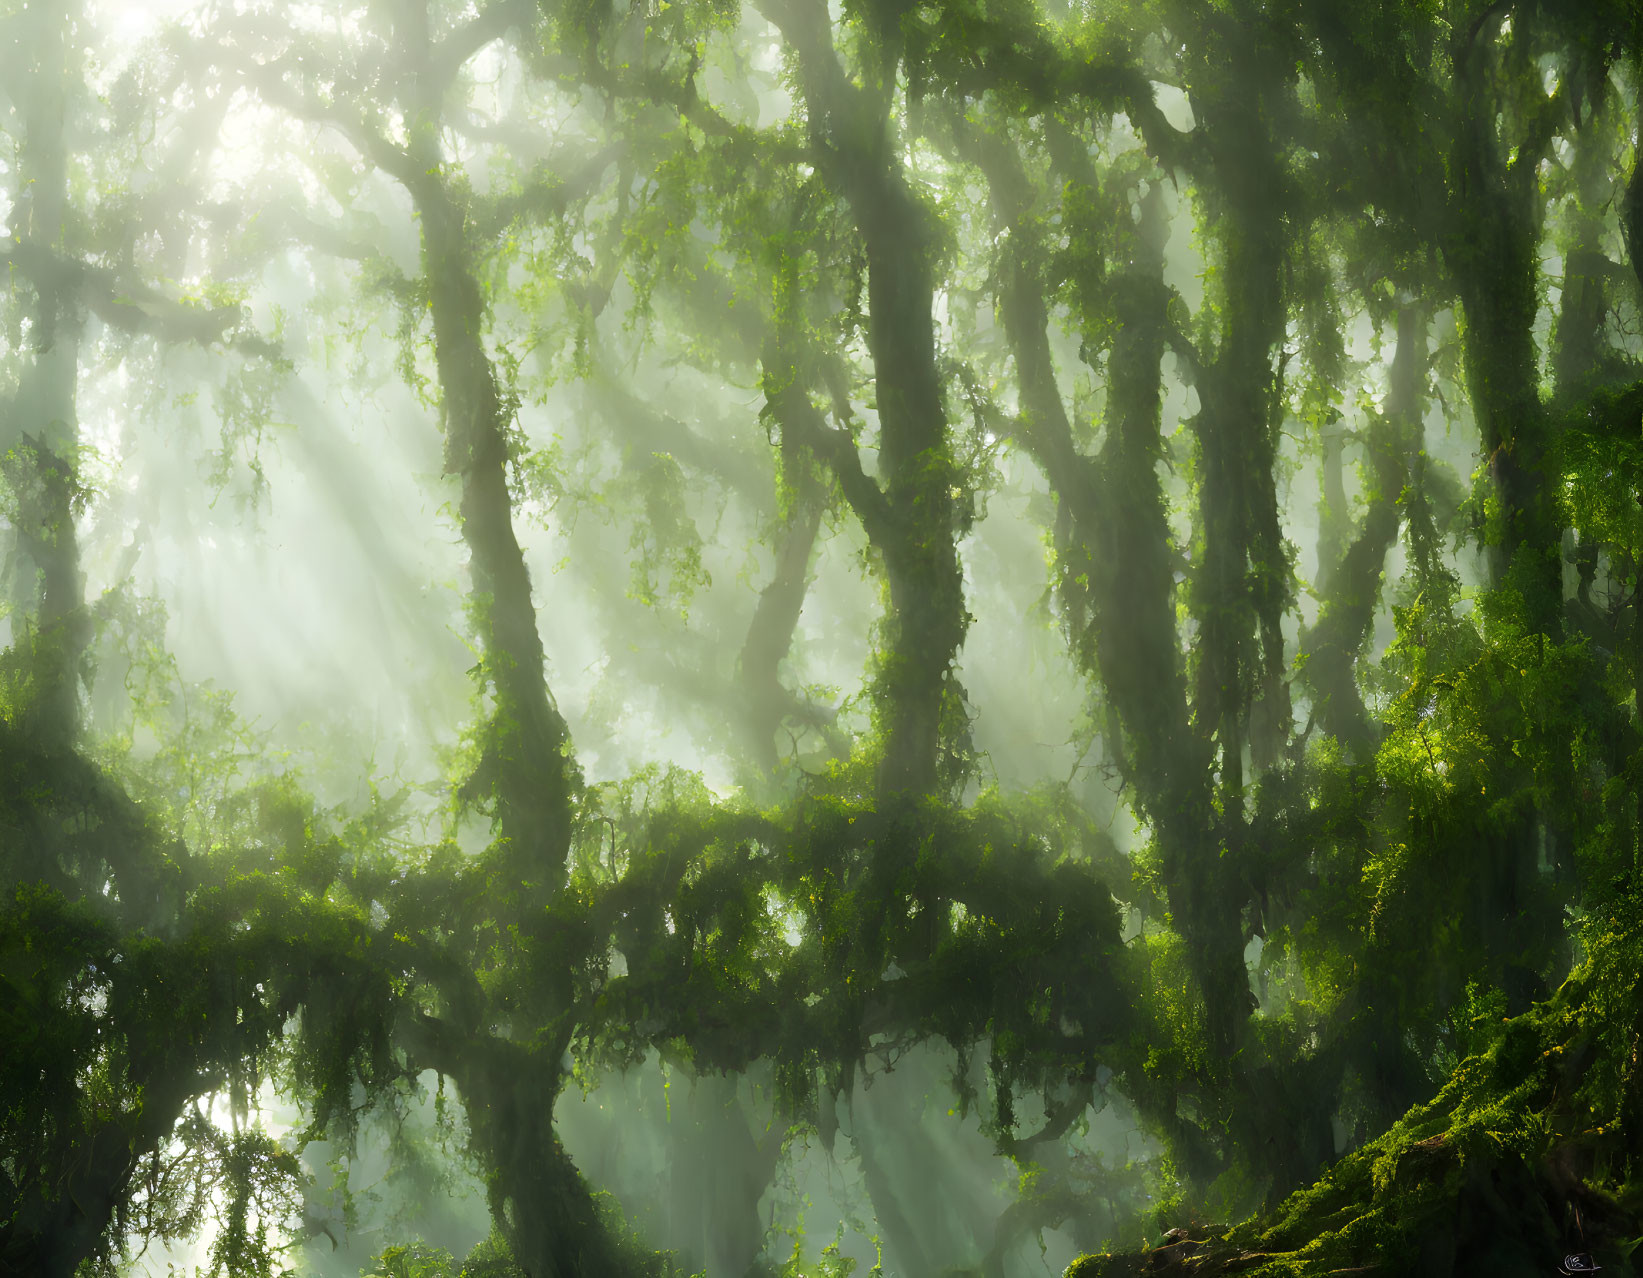 Misty forest with sunlight through moss-covered trees